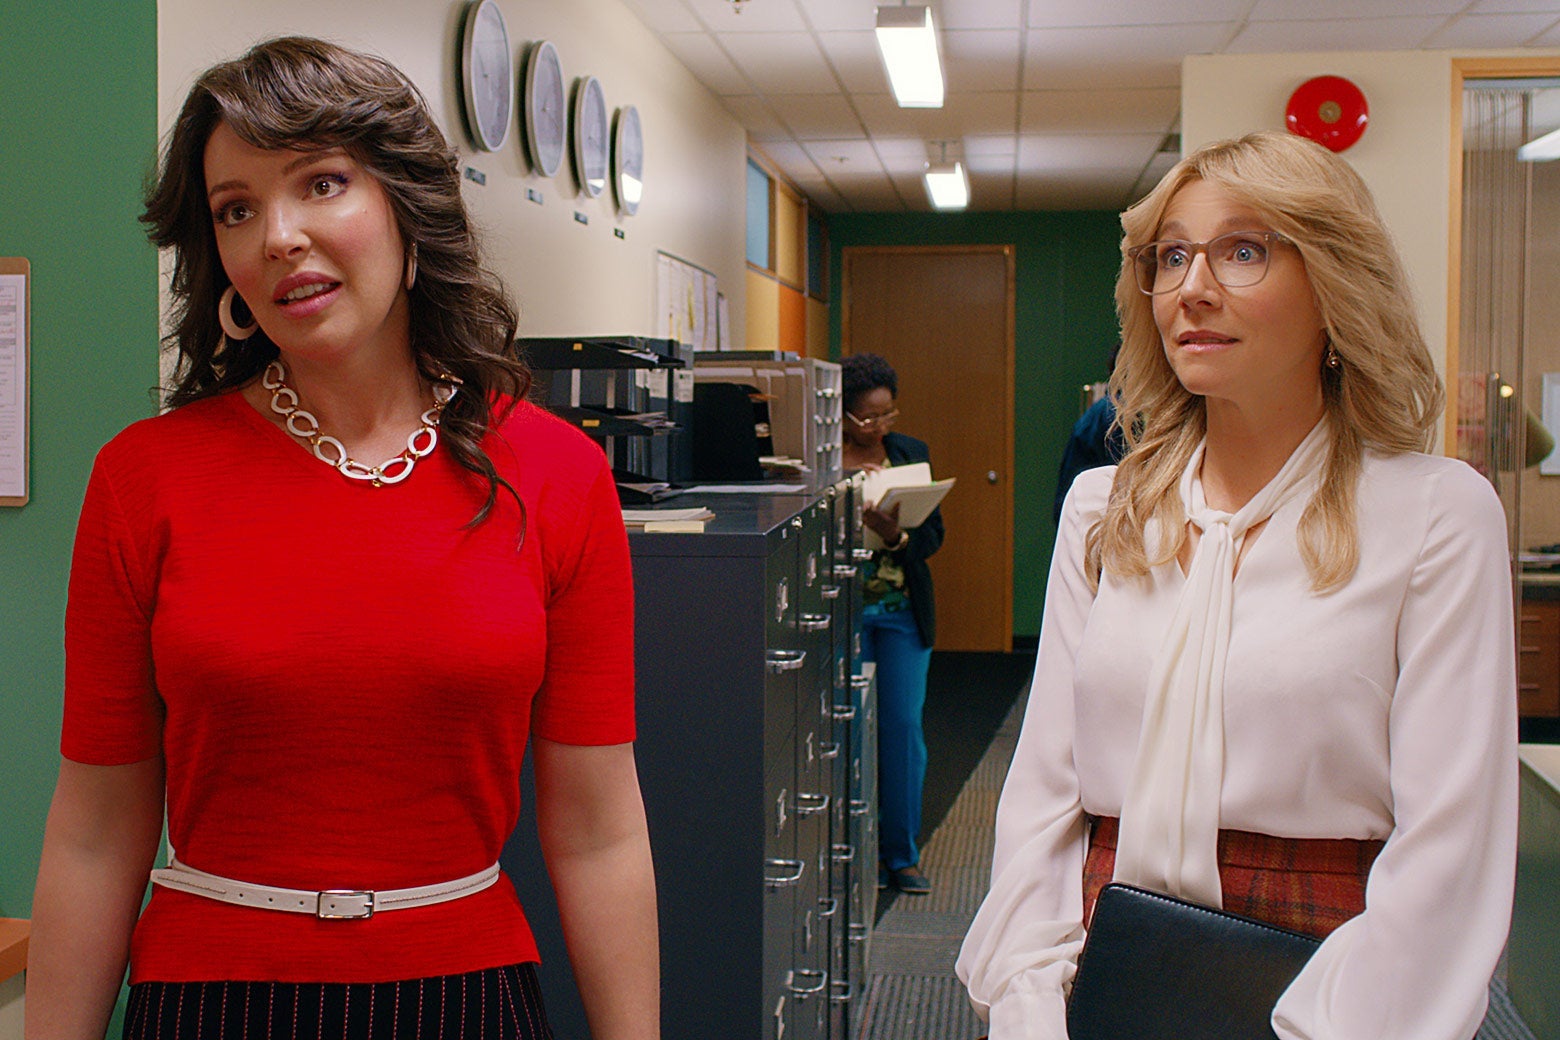 Katherine Heigl and Sarah Chalke in '80s style wardrobe and hair in the show Firefly Lane.